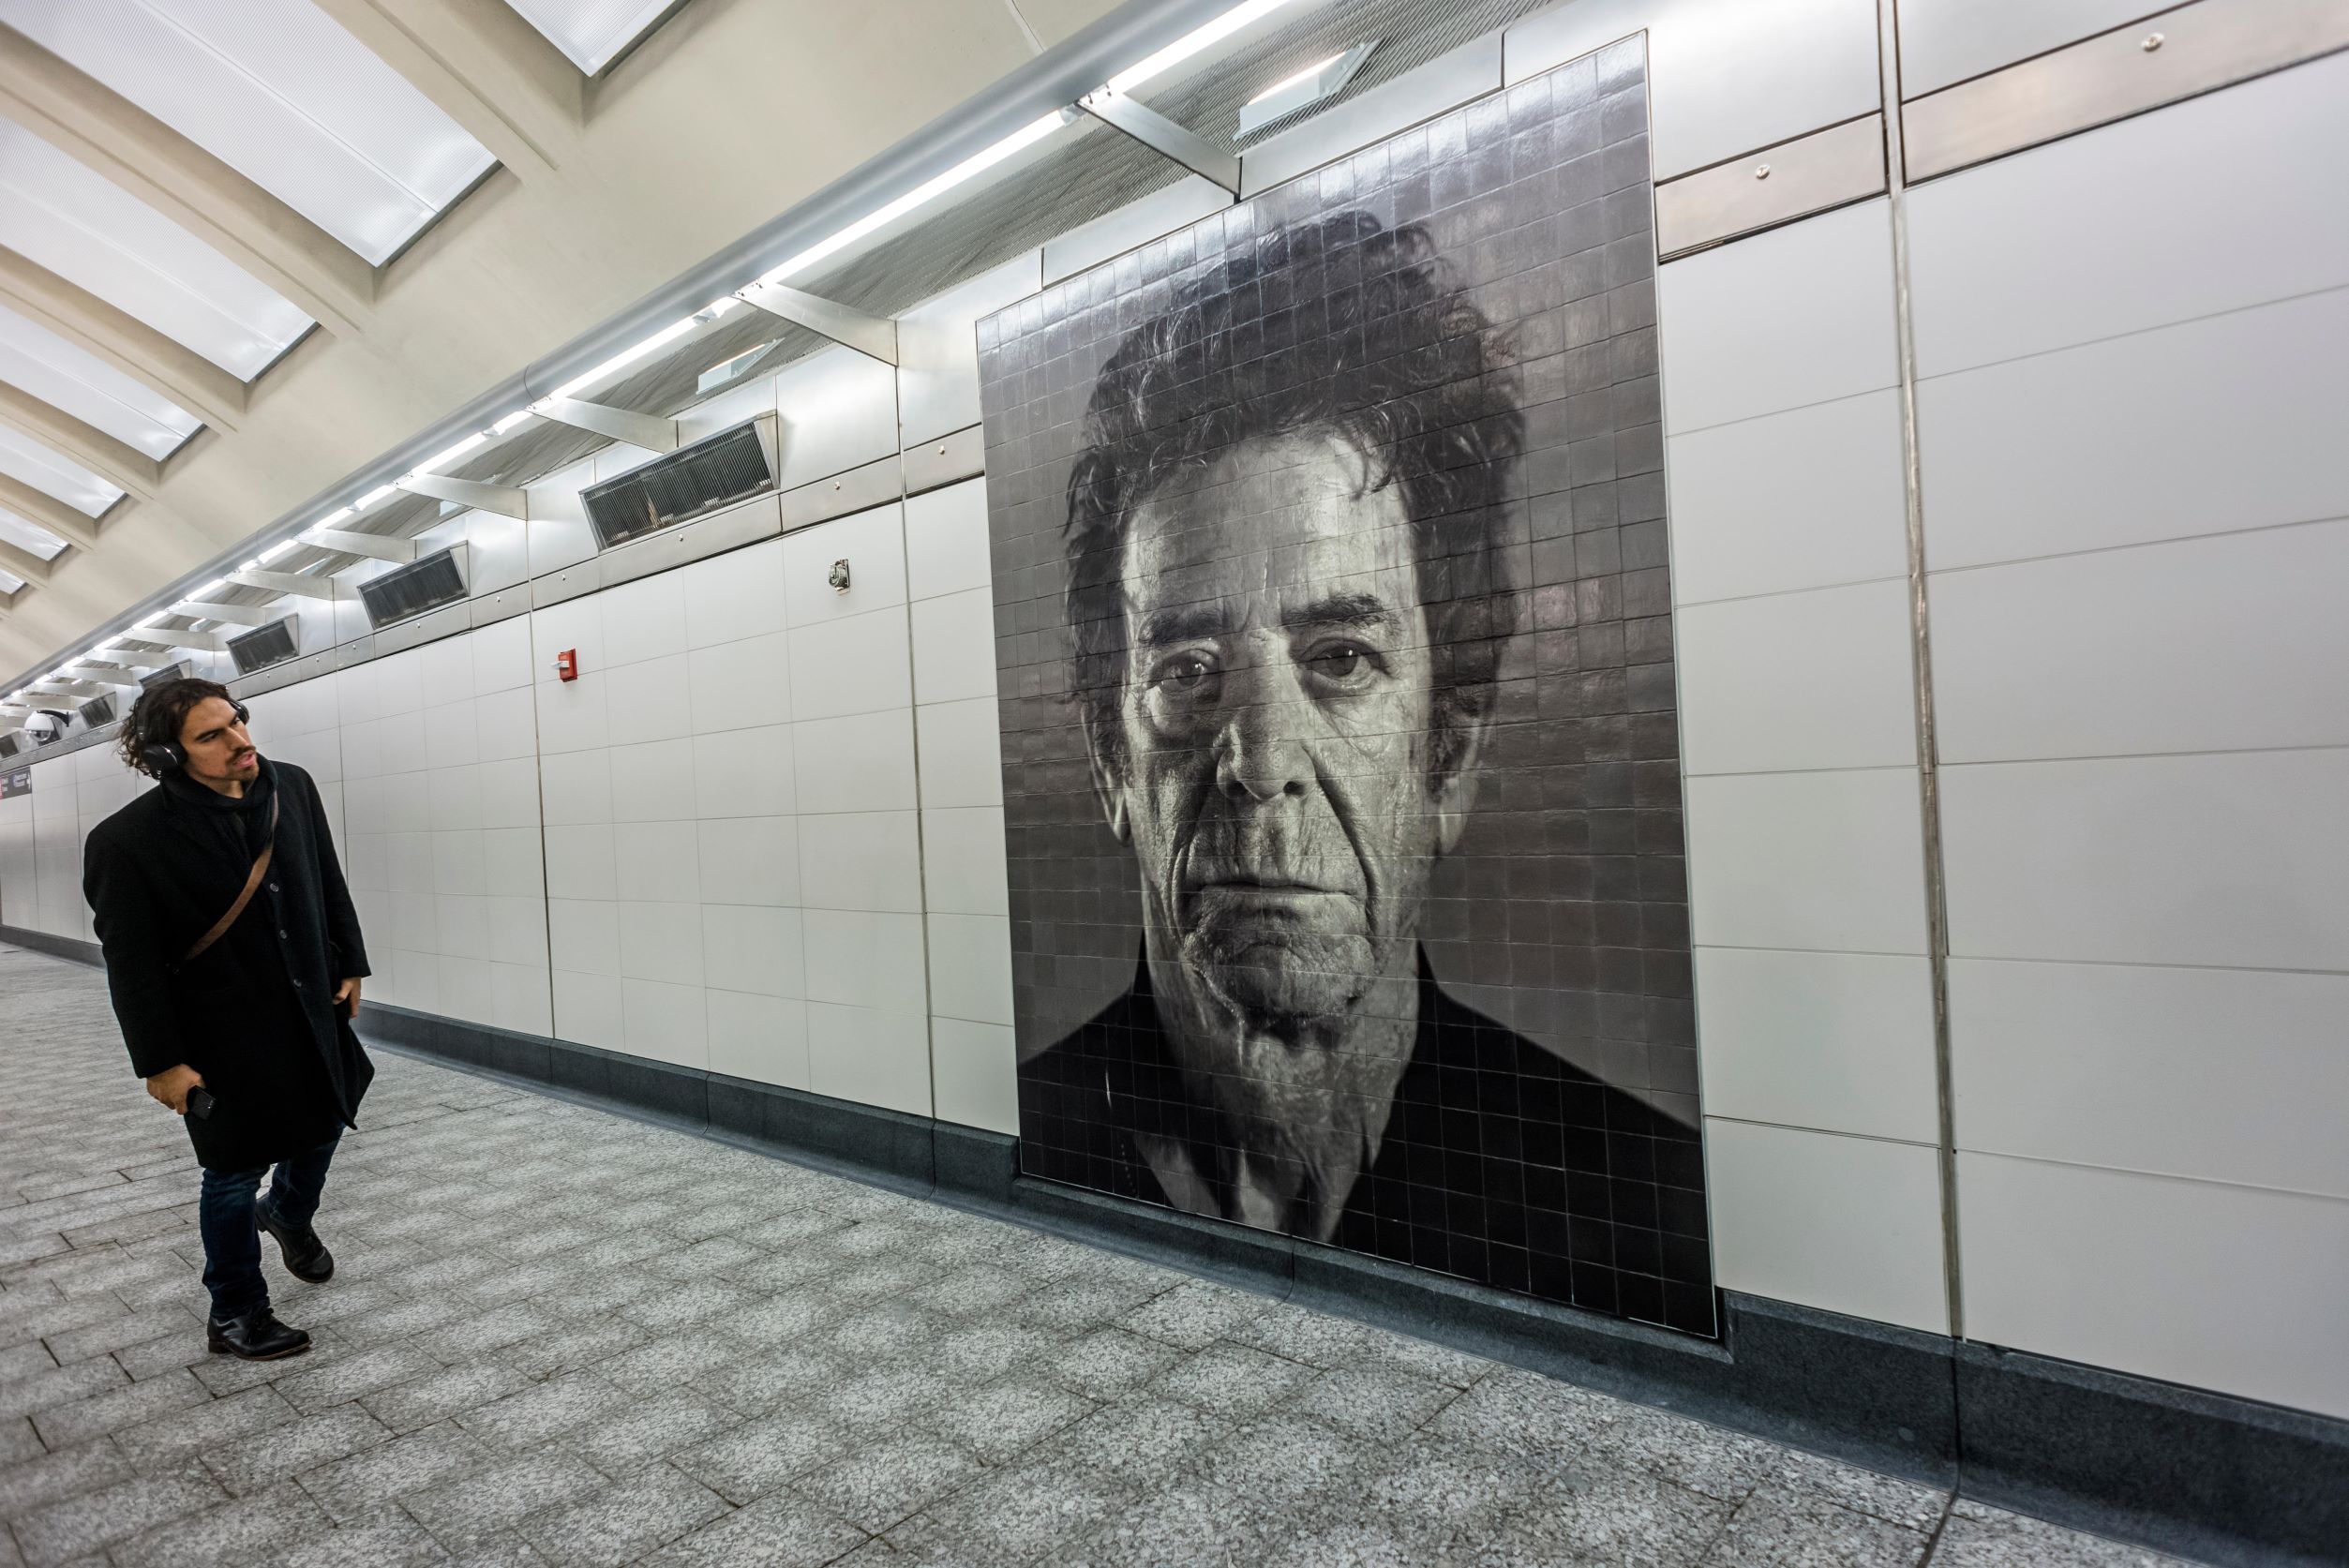 A passenger appreciates a mosaic mural of Lou Reed by artist Chuck Close. Stacy Walsh Rosenstock/ Alamy